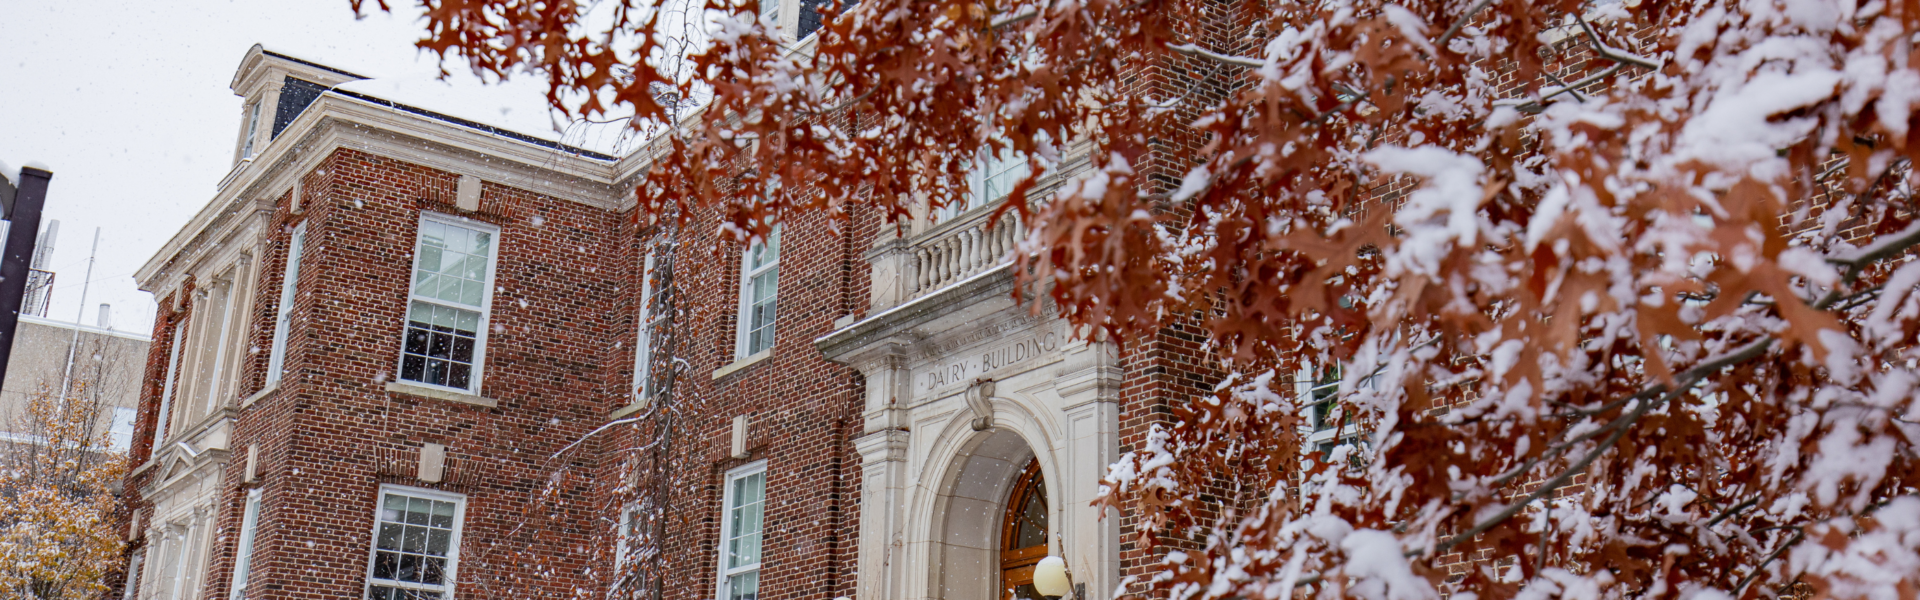 Looking through snow-covered red leaves at the Dairy building.